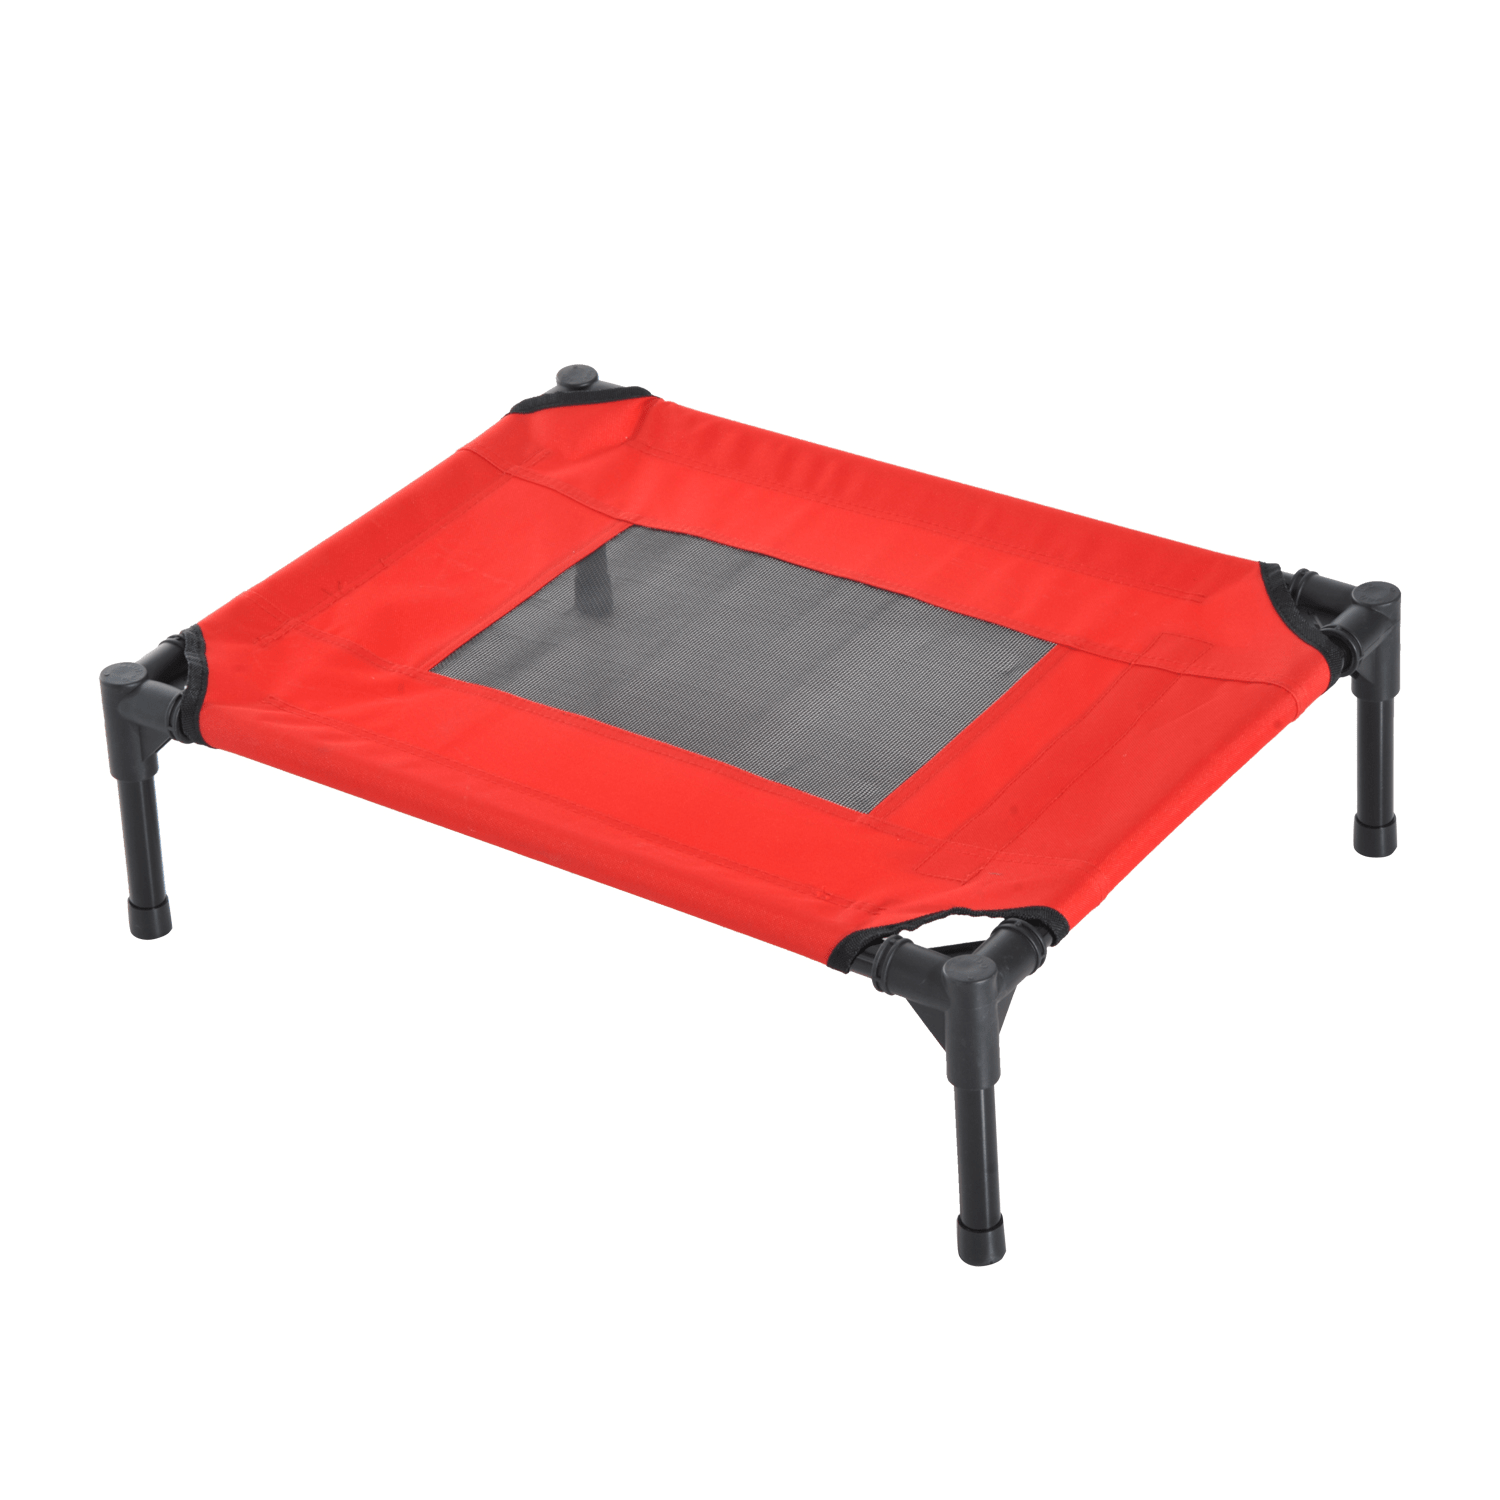 PawHut Raised Dog Bed Cat Elevated Lifted Portable Camping w/ Metal Frame Black and Red (Small) Sleeping Mats and Airbeds Cosy Camping Co.   